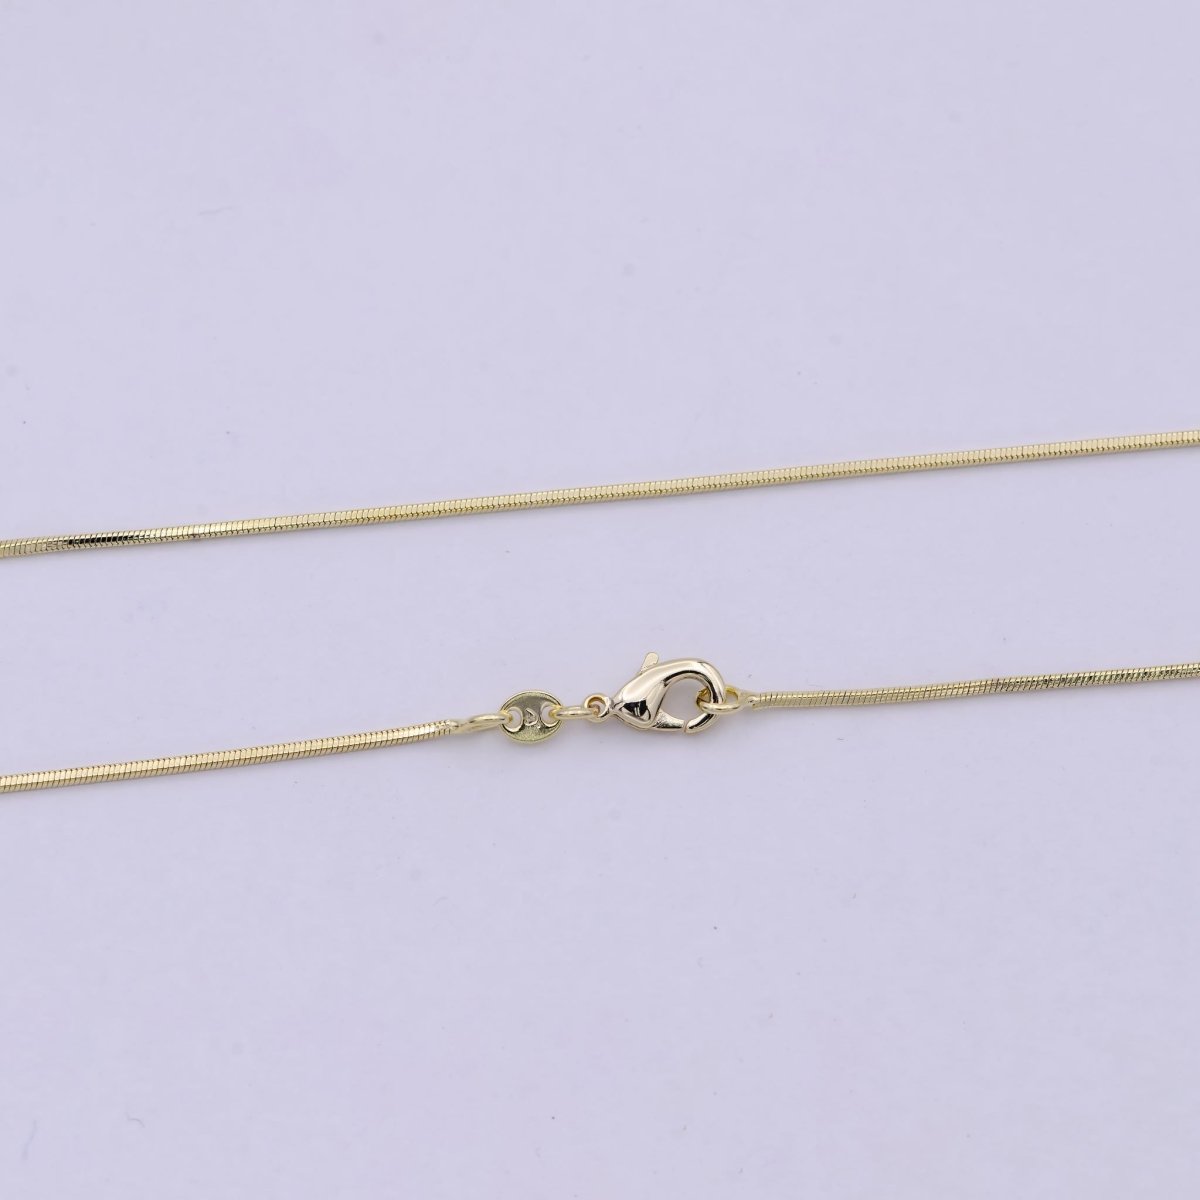 Dainty Herringbone Chain Necklace - 1.1mm 14k Gold Filled Snake Chain - 18 inches Layering Necklace Ready To Wear w/ Lobster Clasp | WA-518 WA-519 - DLUXCA